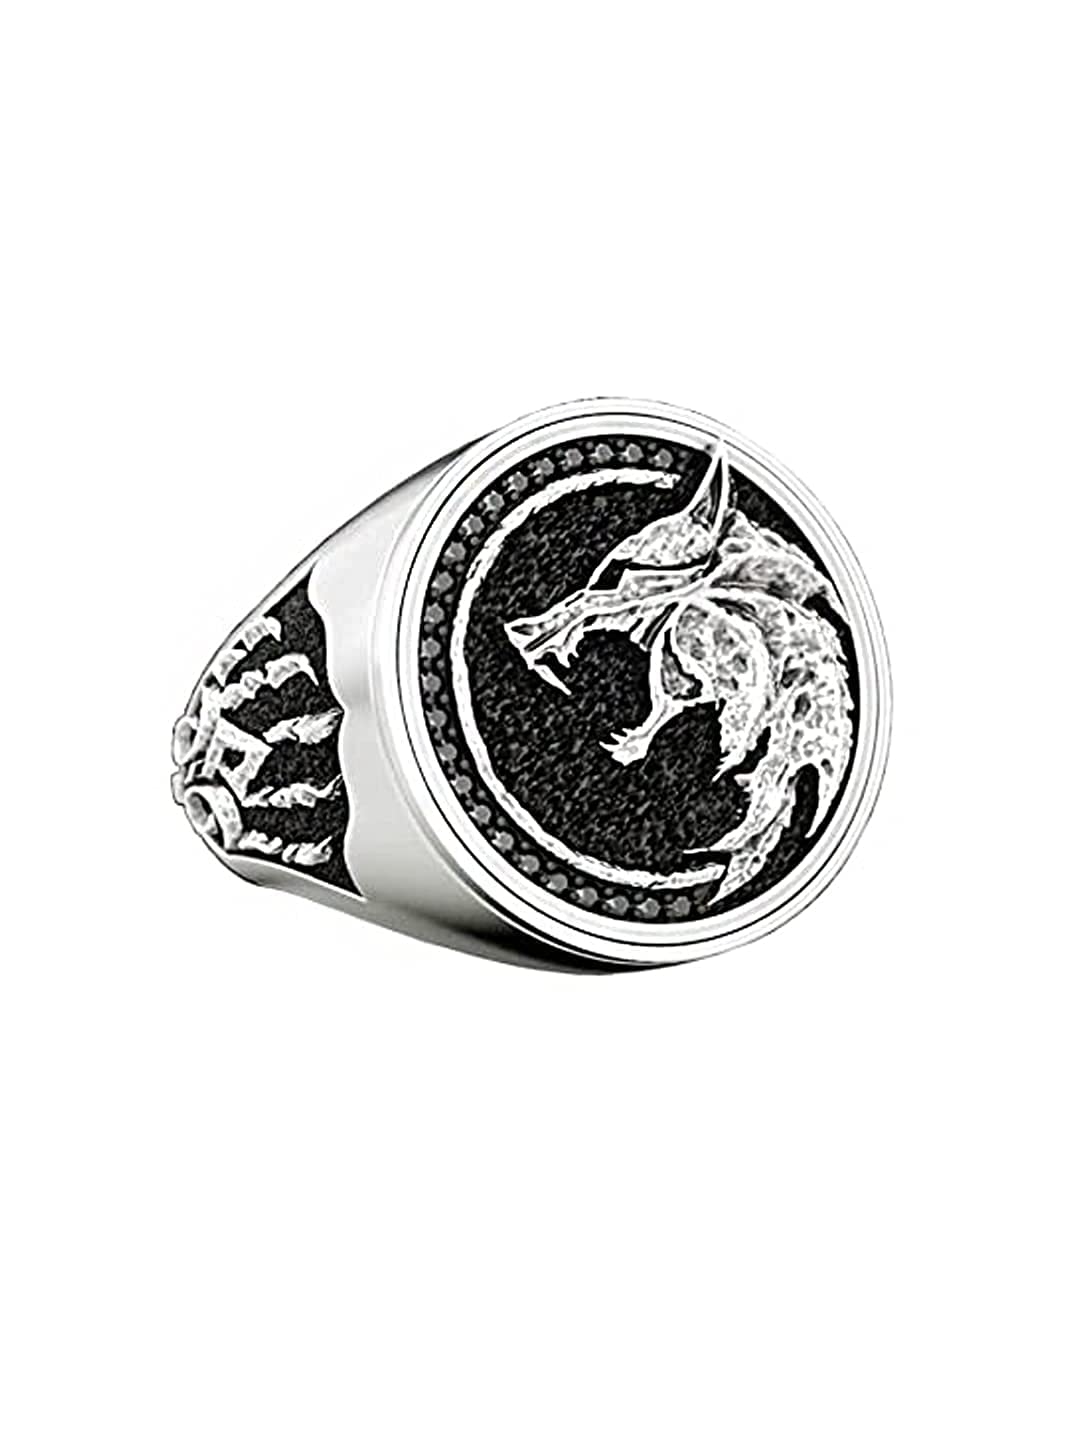 Yellow Chimes Rings for Men Stainless Steel Men Ring Viking Ring Wizard Warrior Hunter Wolf Head Silver Ring for Men and Boy's